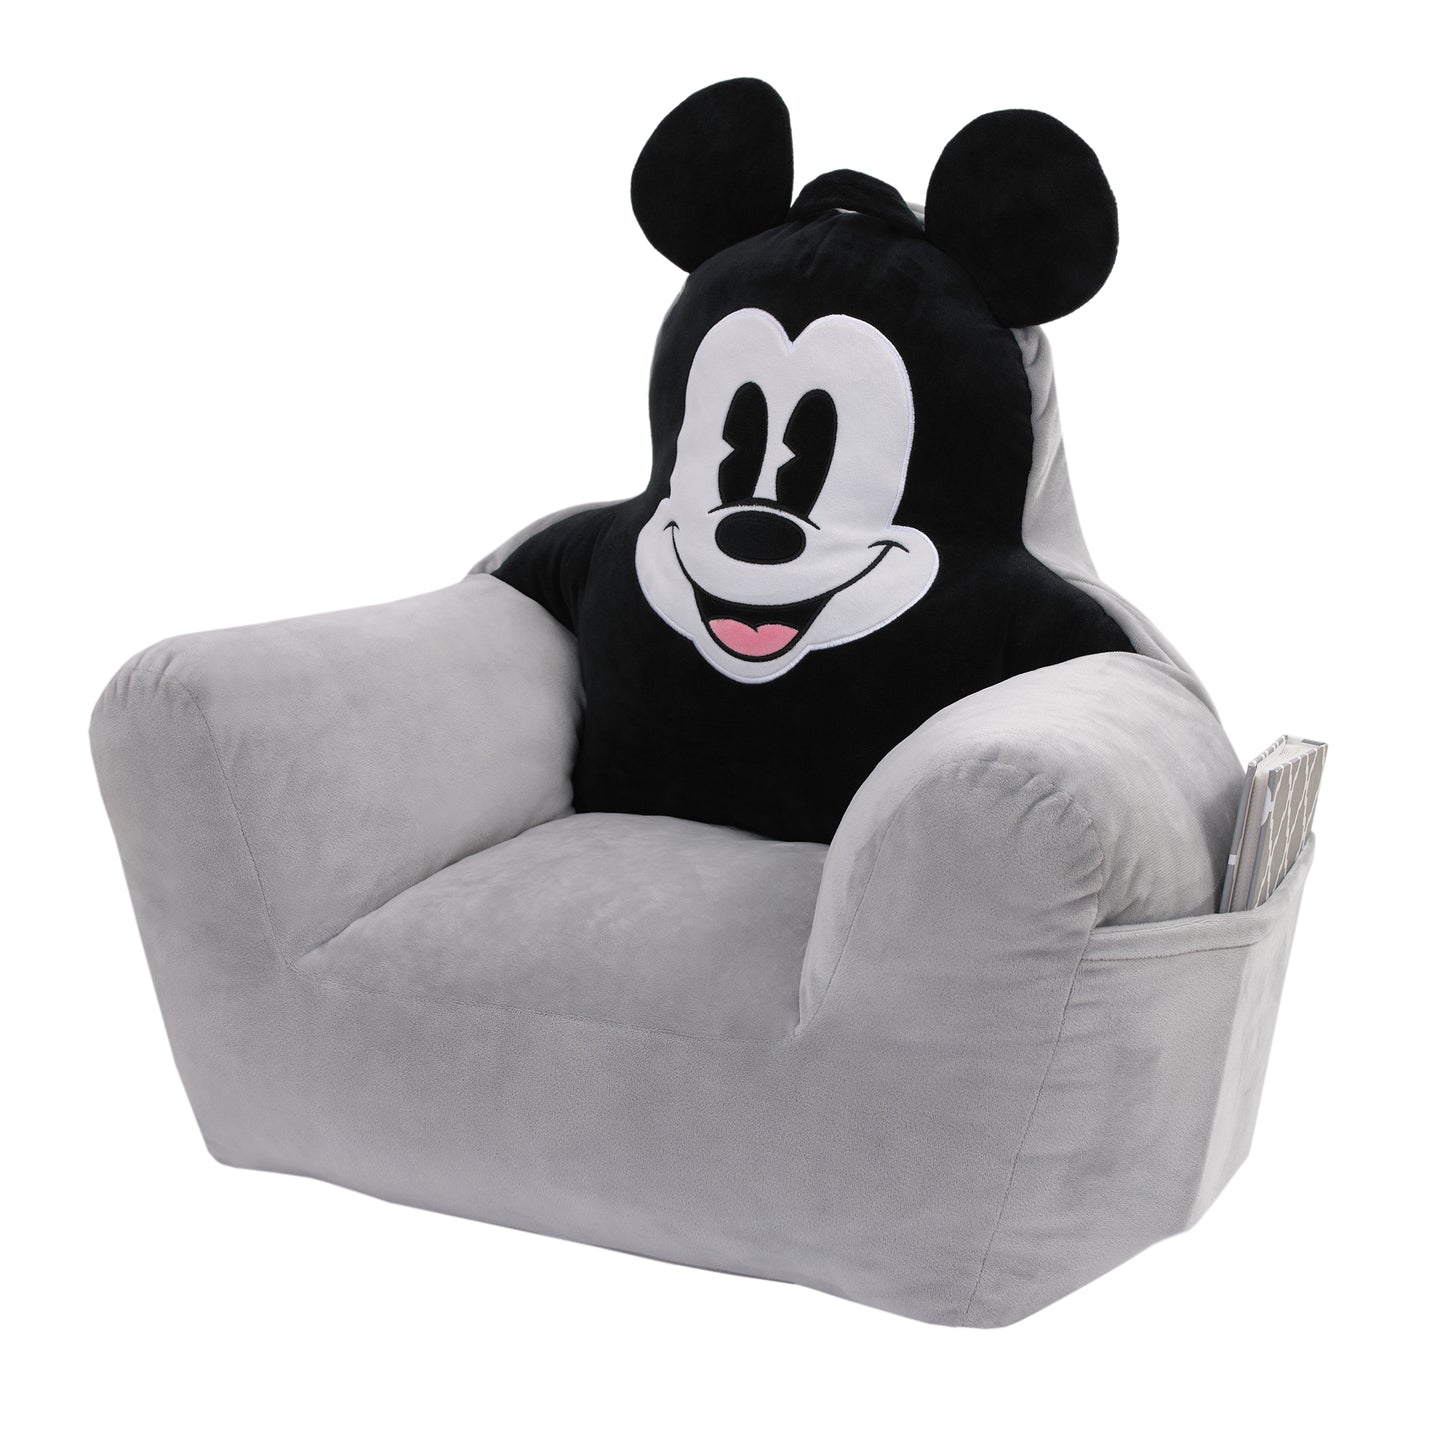 Disney Mickey Mouse Shaped Gray, Black, and White Plush Chair